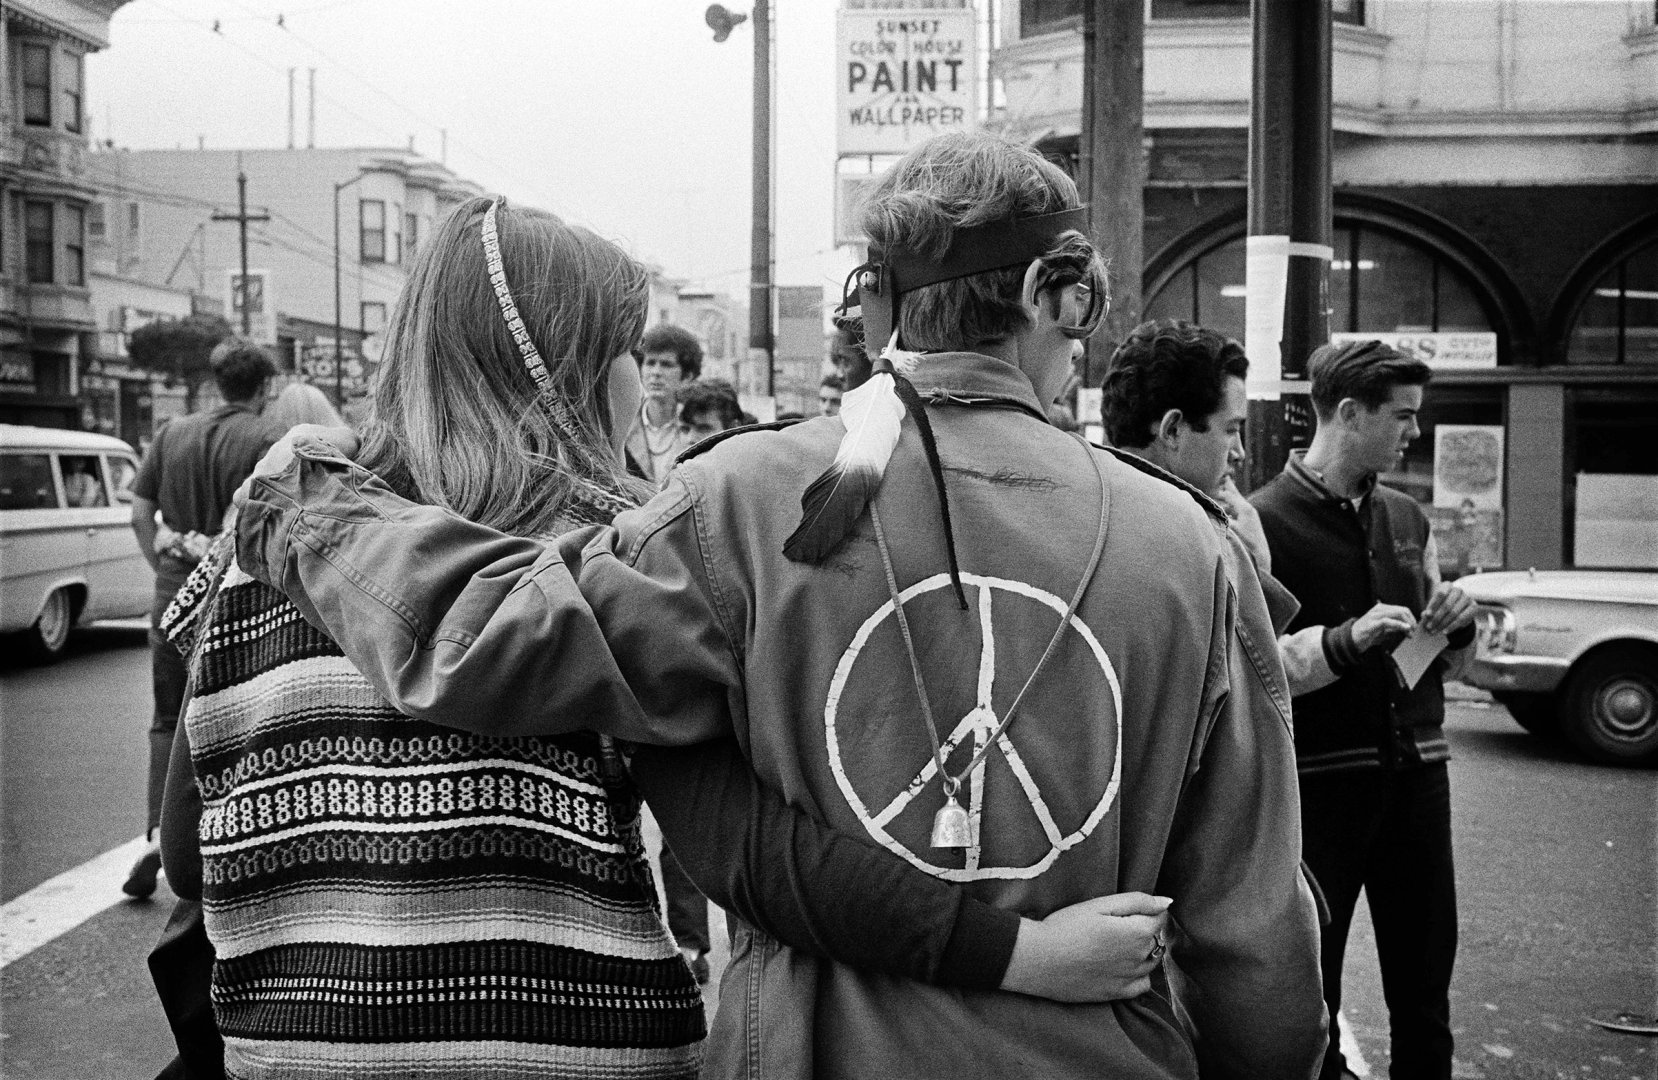 Black and white photograph showing a young White woman and man from behind. The couple has their, arms around one another and they are walking in the street. The woman wears an intricately patterned sweater and woven hair accessory. The man wears clothing that is of Native American design along with military jacket with a peace symbol drawn on the back. A group of eight young men and a woman are visible in the background. The text 'SUNSET COLOR HOUSE PAINT AND WALLPAPER' is visible on a sign above the street on a corner building.